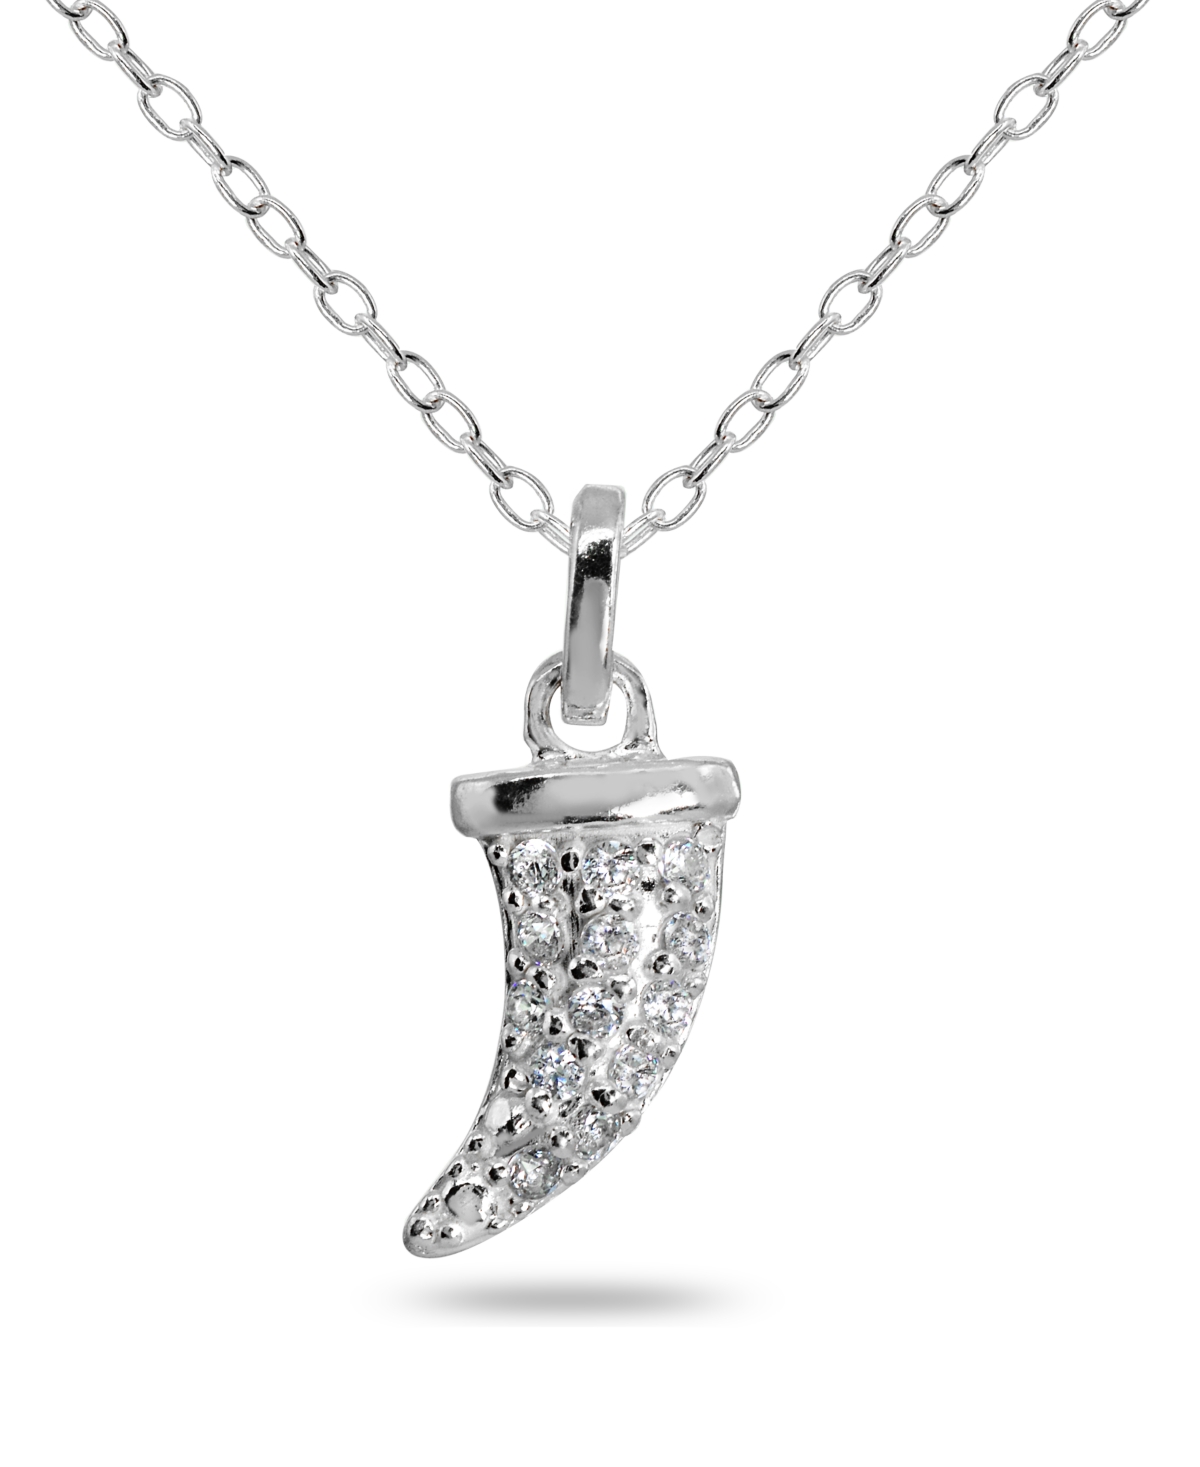 Cubic Zirconia Horn Pendant in Sterling Silver - Silver